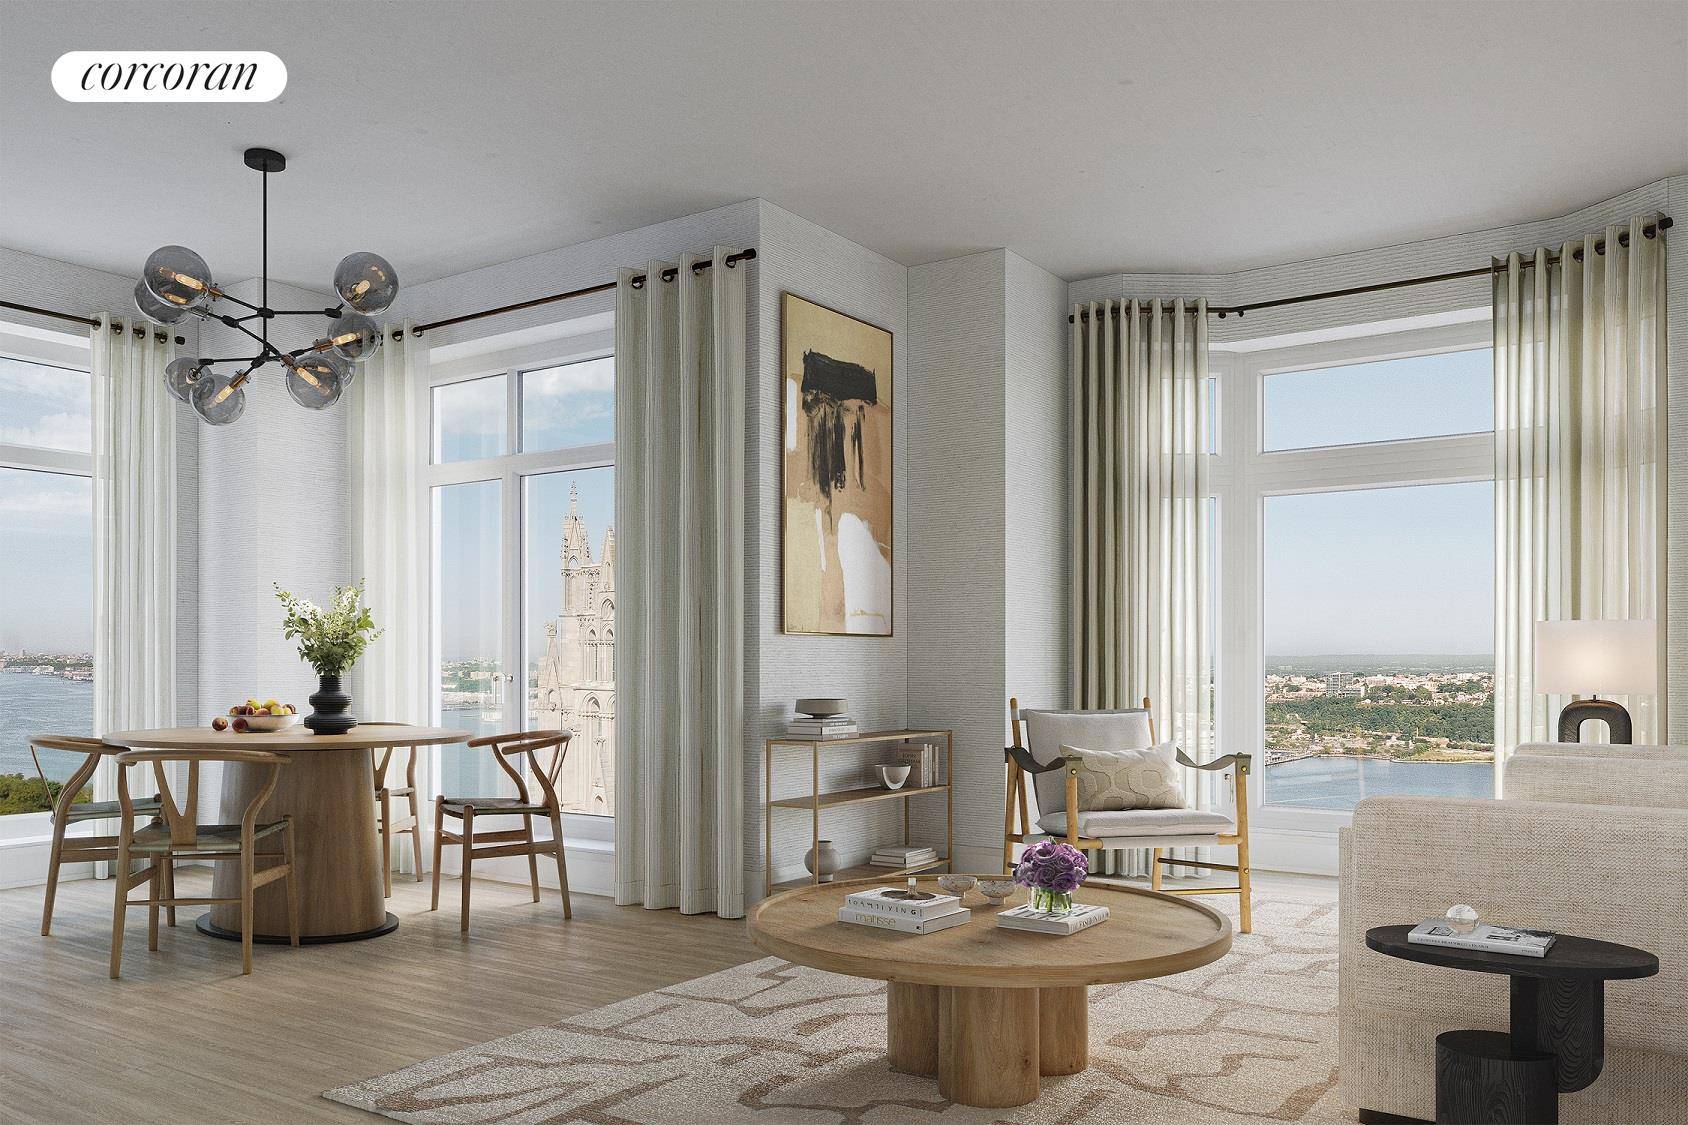 Occupying Claremont Hall's coveted southwest corner, this beautiful 1, 261 square foot two bedroom, two bathroom home showcases unmatched views of the iconic spire of Riverside Church, the Hudson River, ...